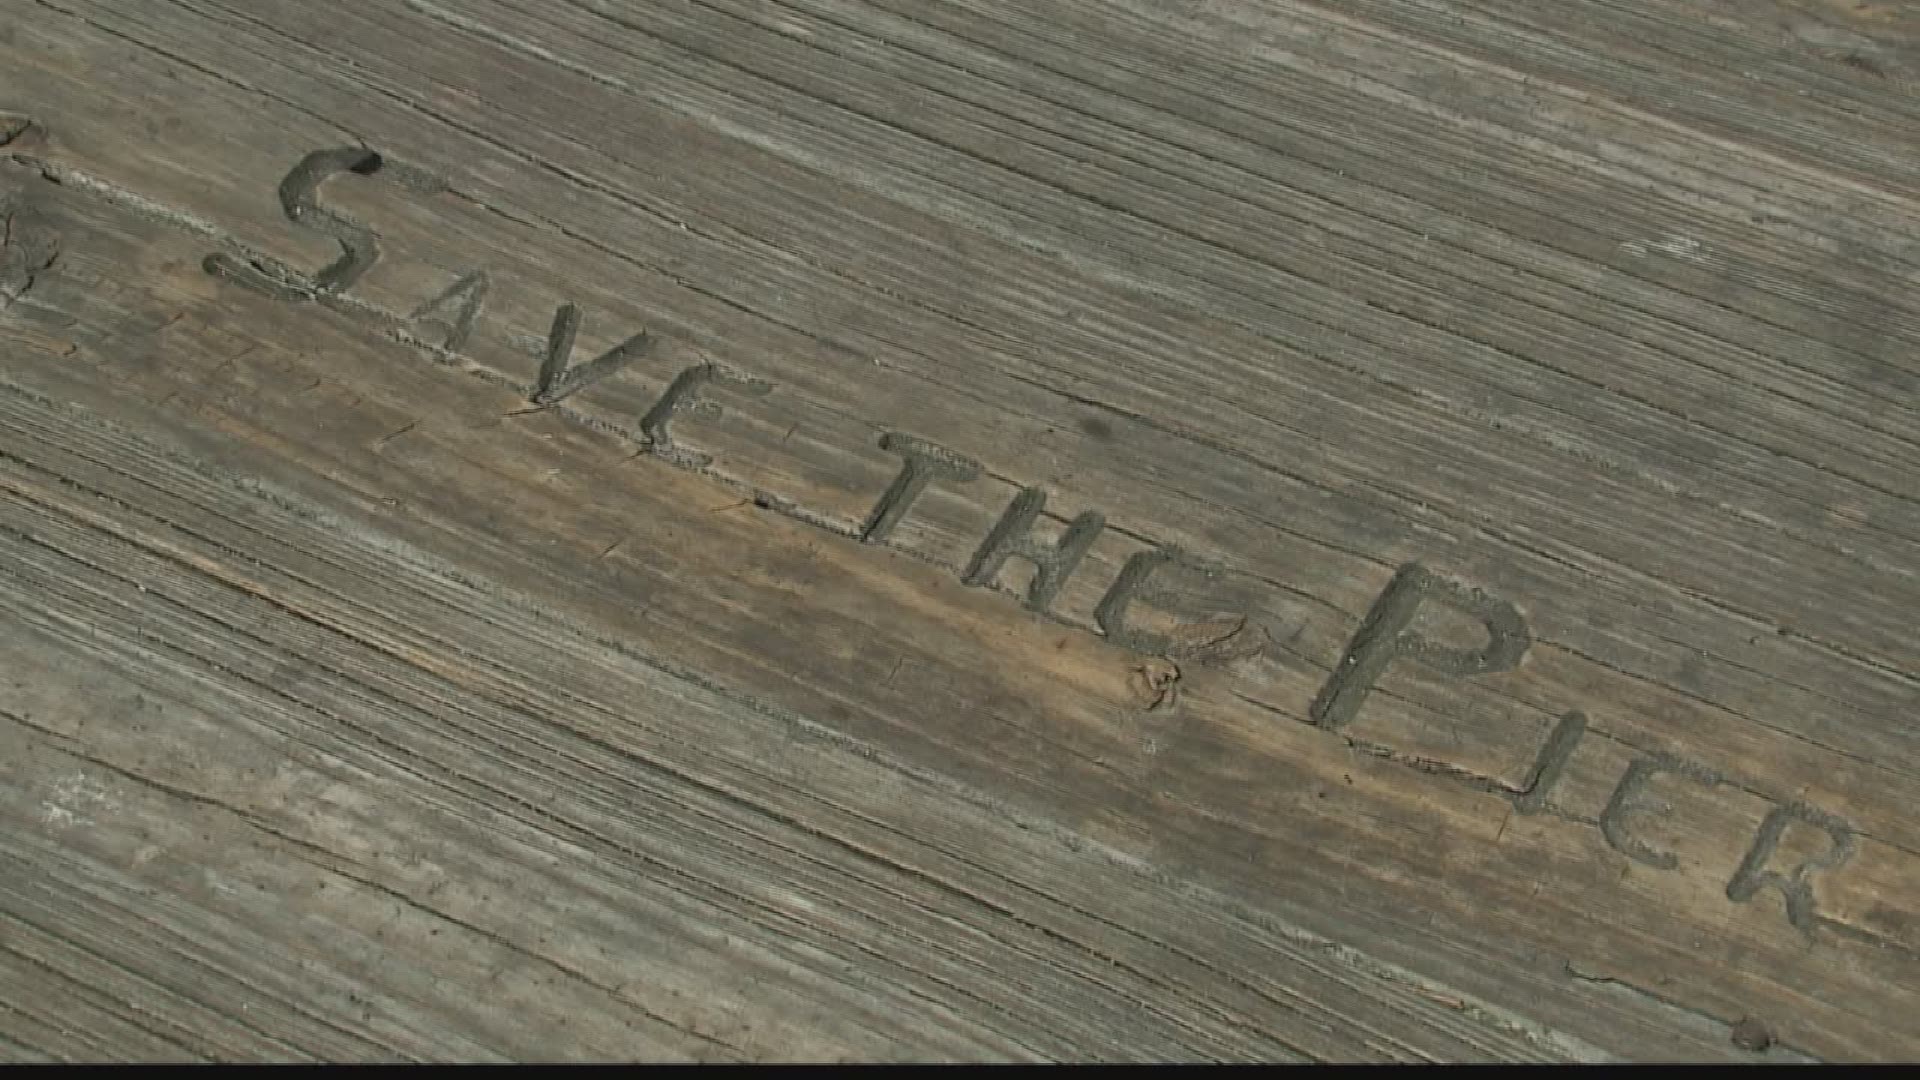 It is a local landmark, a place where people go to fish, crab and simply spend time together.Now, an owner confirms there's a deal in the works to sell Lynnhaven Fishing Pier in Virginia Beach.